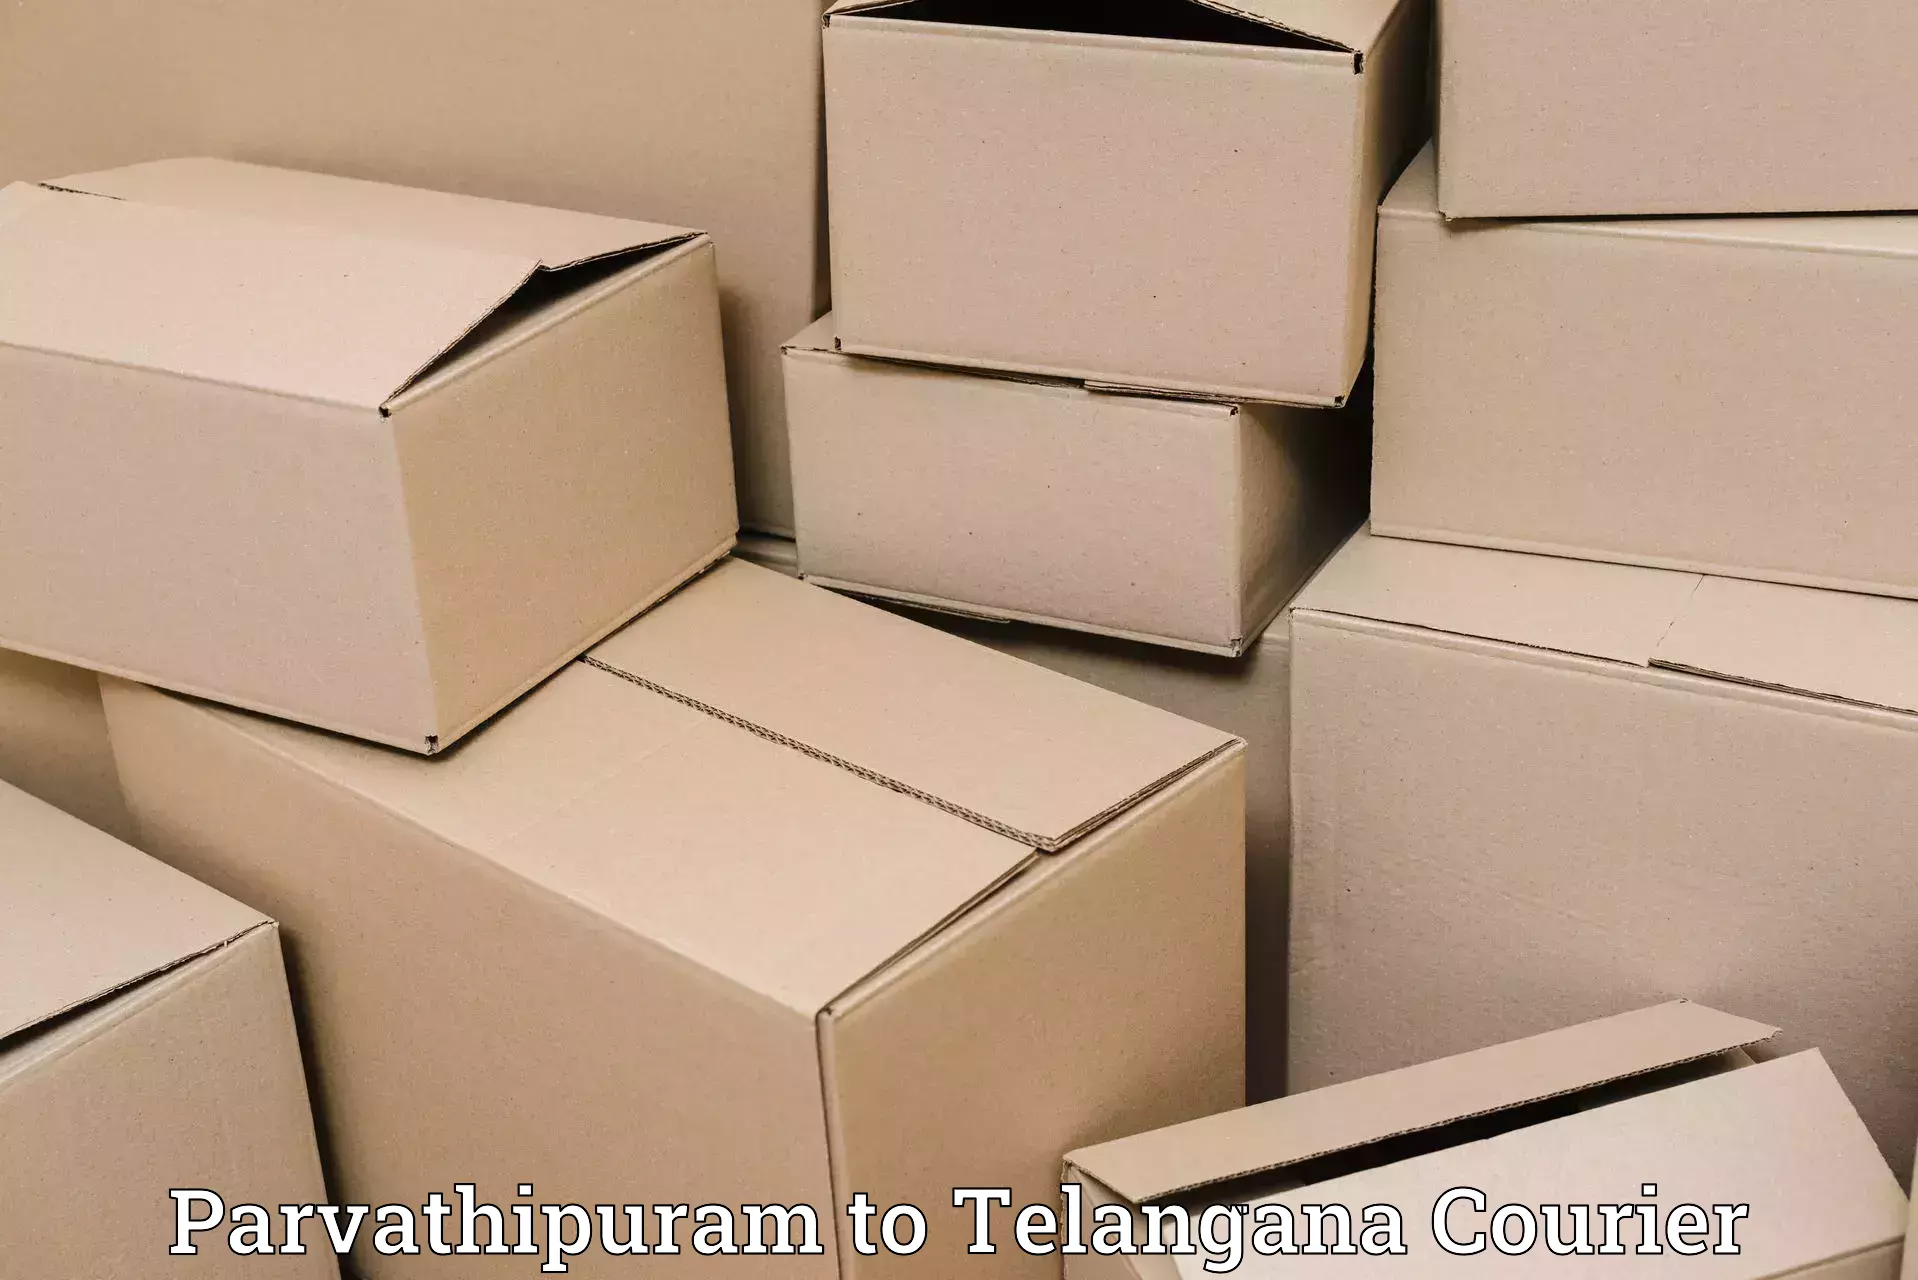 Overnight delivery services in Parvathipuram to Yellandu